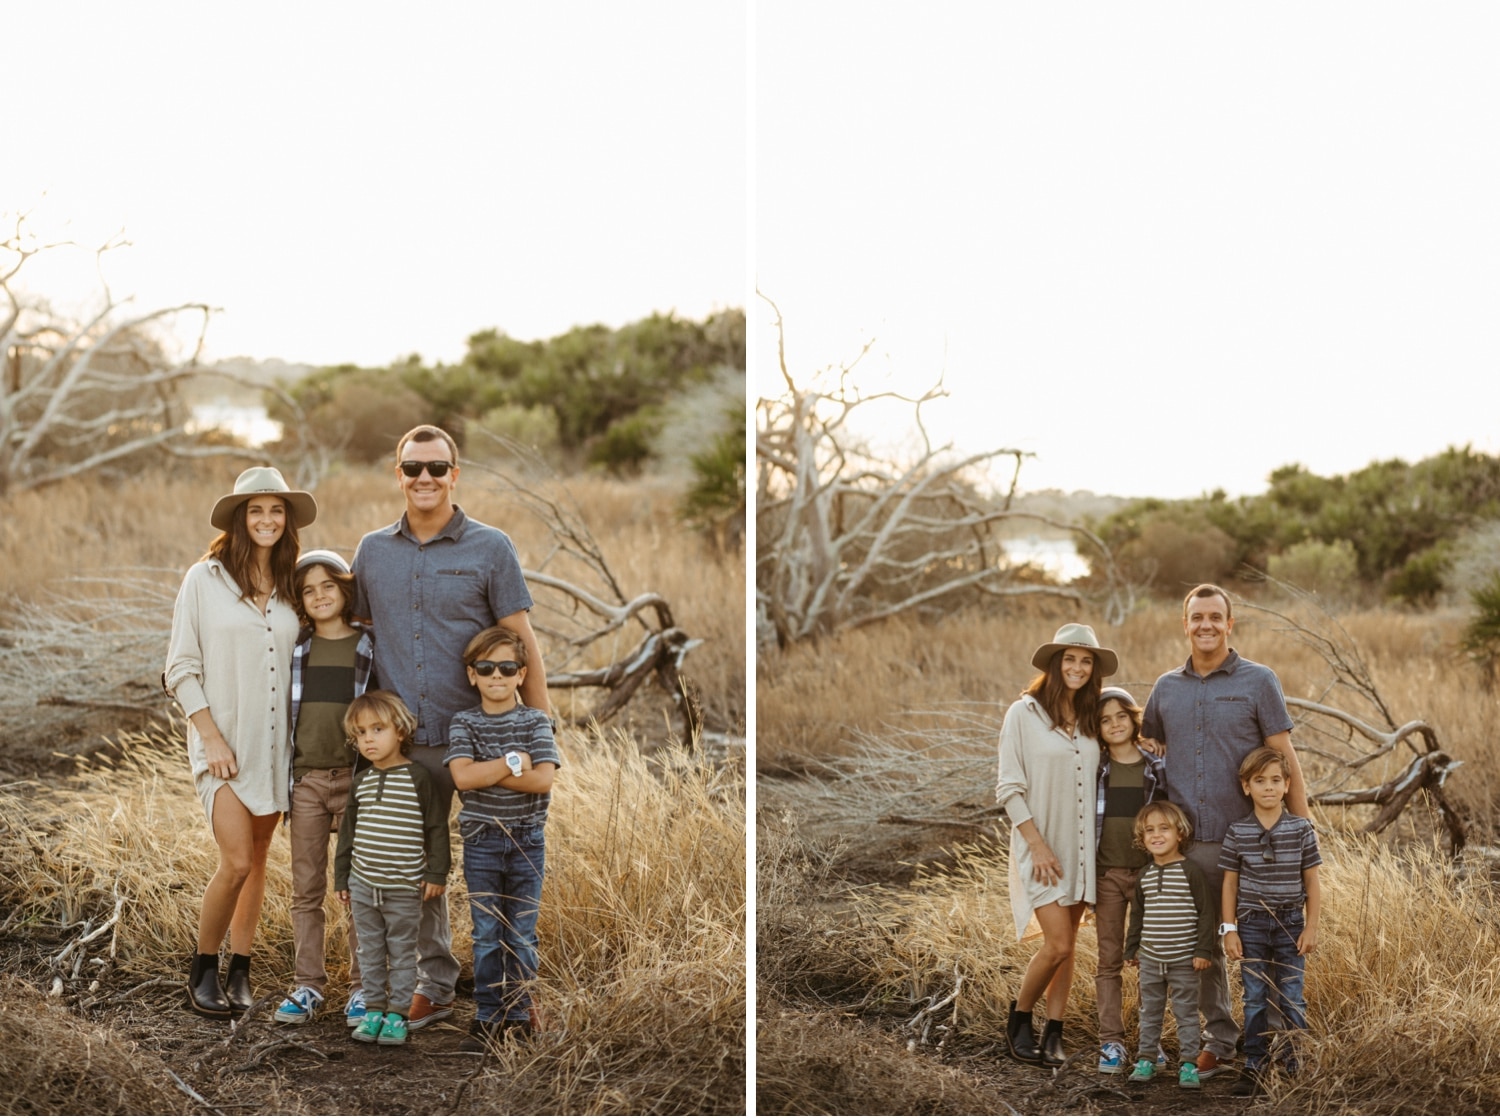 The Kling Family - St. Augustine Photography 2